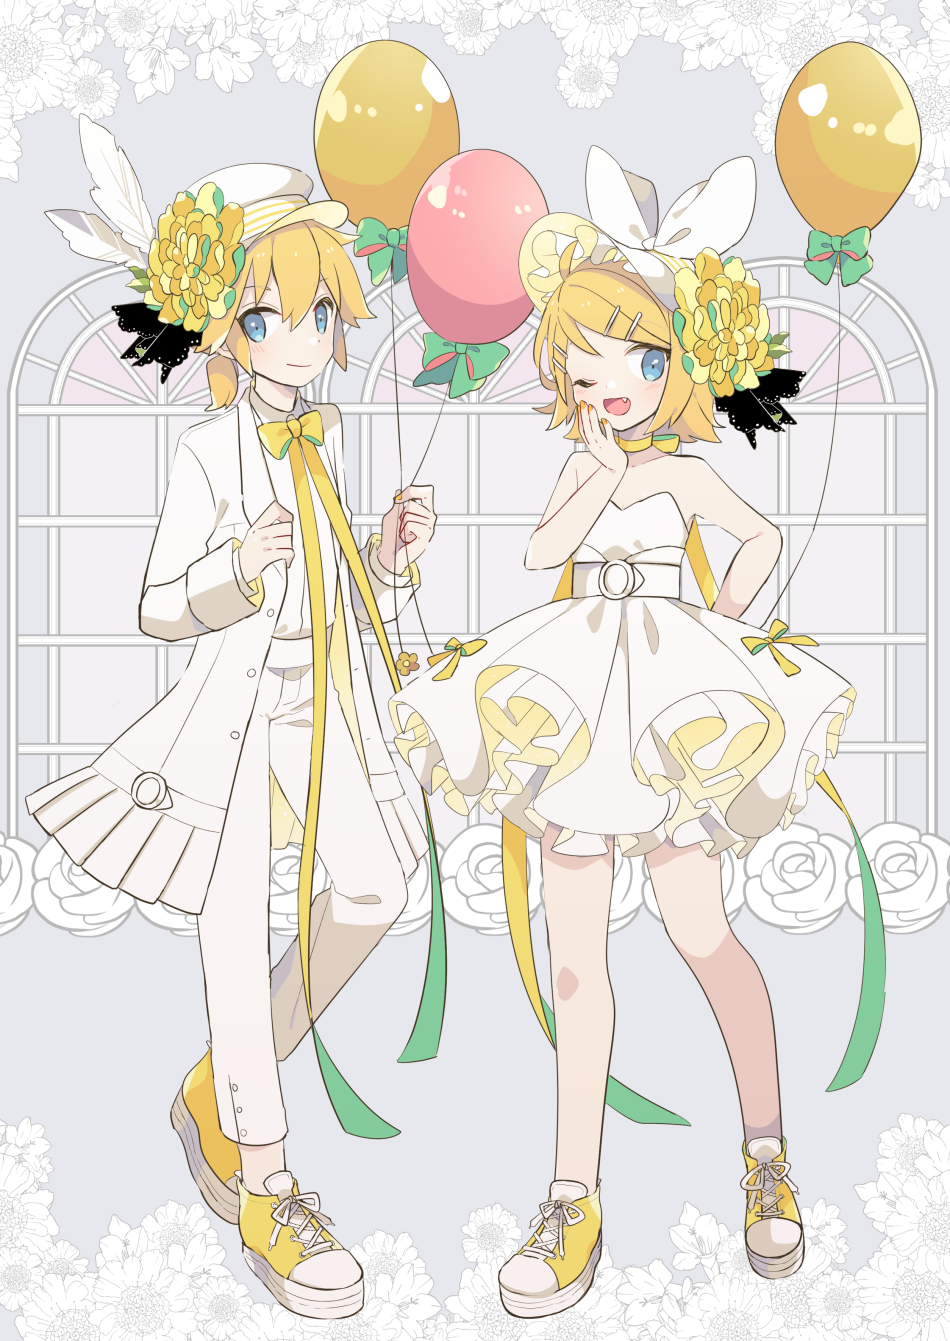 1boy 1girl arm_behind_back balloon bangs blonde_hair blue_eyes bow commentary dress flower full_body hair_bow hair_ornament hairclip hand_on_own_cheek hat hat_feather hat_flower highres holding holding_balloon holding_jacket jacket kagamine_len kagamine_rin layered_dress looking_at_viewer nail_polish neck_ribbon one_eye_closed open_mouth pants ribbon rose shirt shoes short_hair short_ponytail sleeveless sleeveless_dress smile sneakers strapless strapless_dress swept_bangs vocaloid white_bow white_dress white_headwear white_jacket white_pants white_shirt window yellow_footwear yellow_nails yellow_ribbon yoshiki